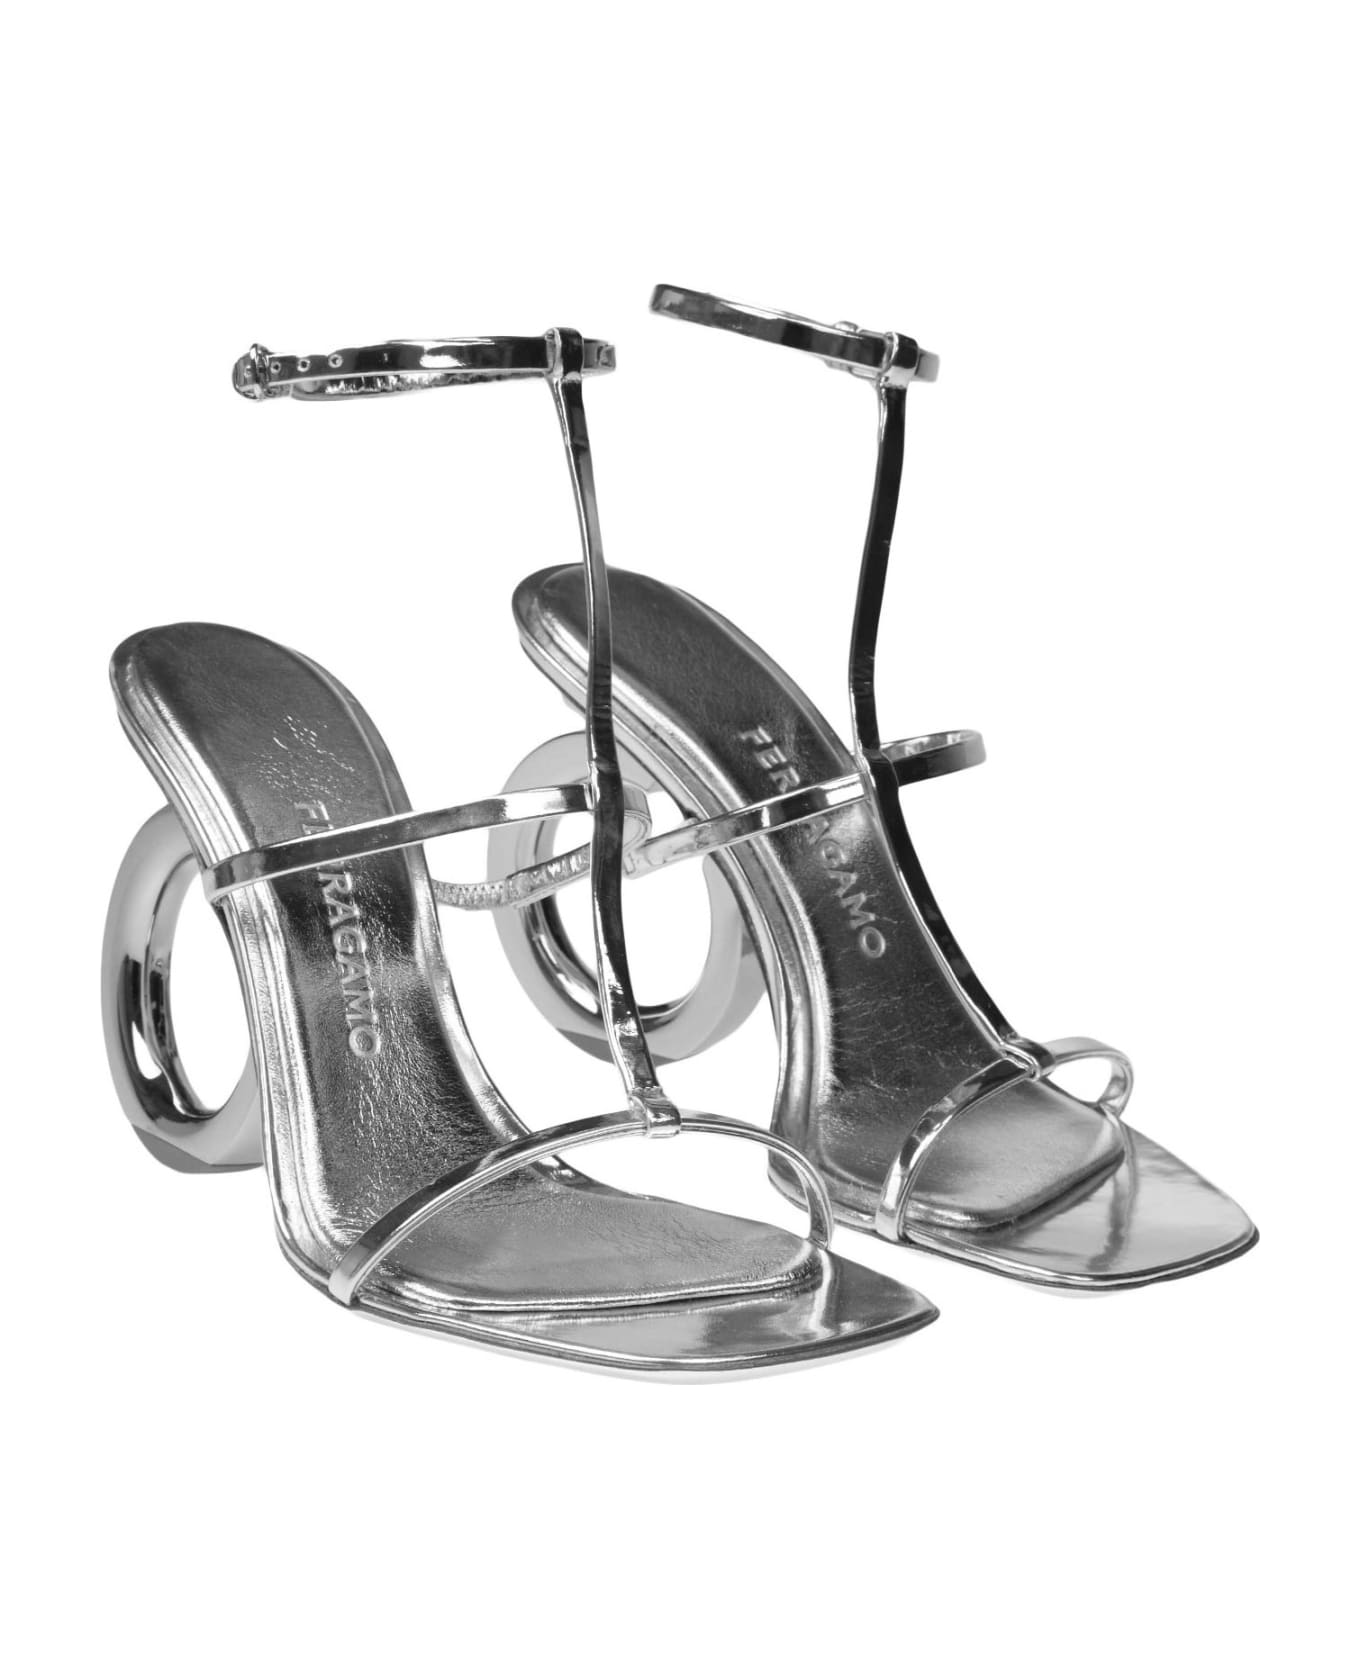 Ferragamo Elina Sandal In Painted Leather With Gancini Heel - Silver アクセサリー